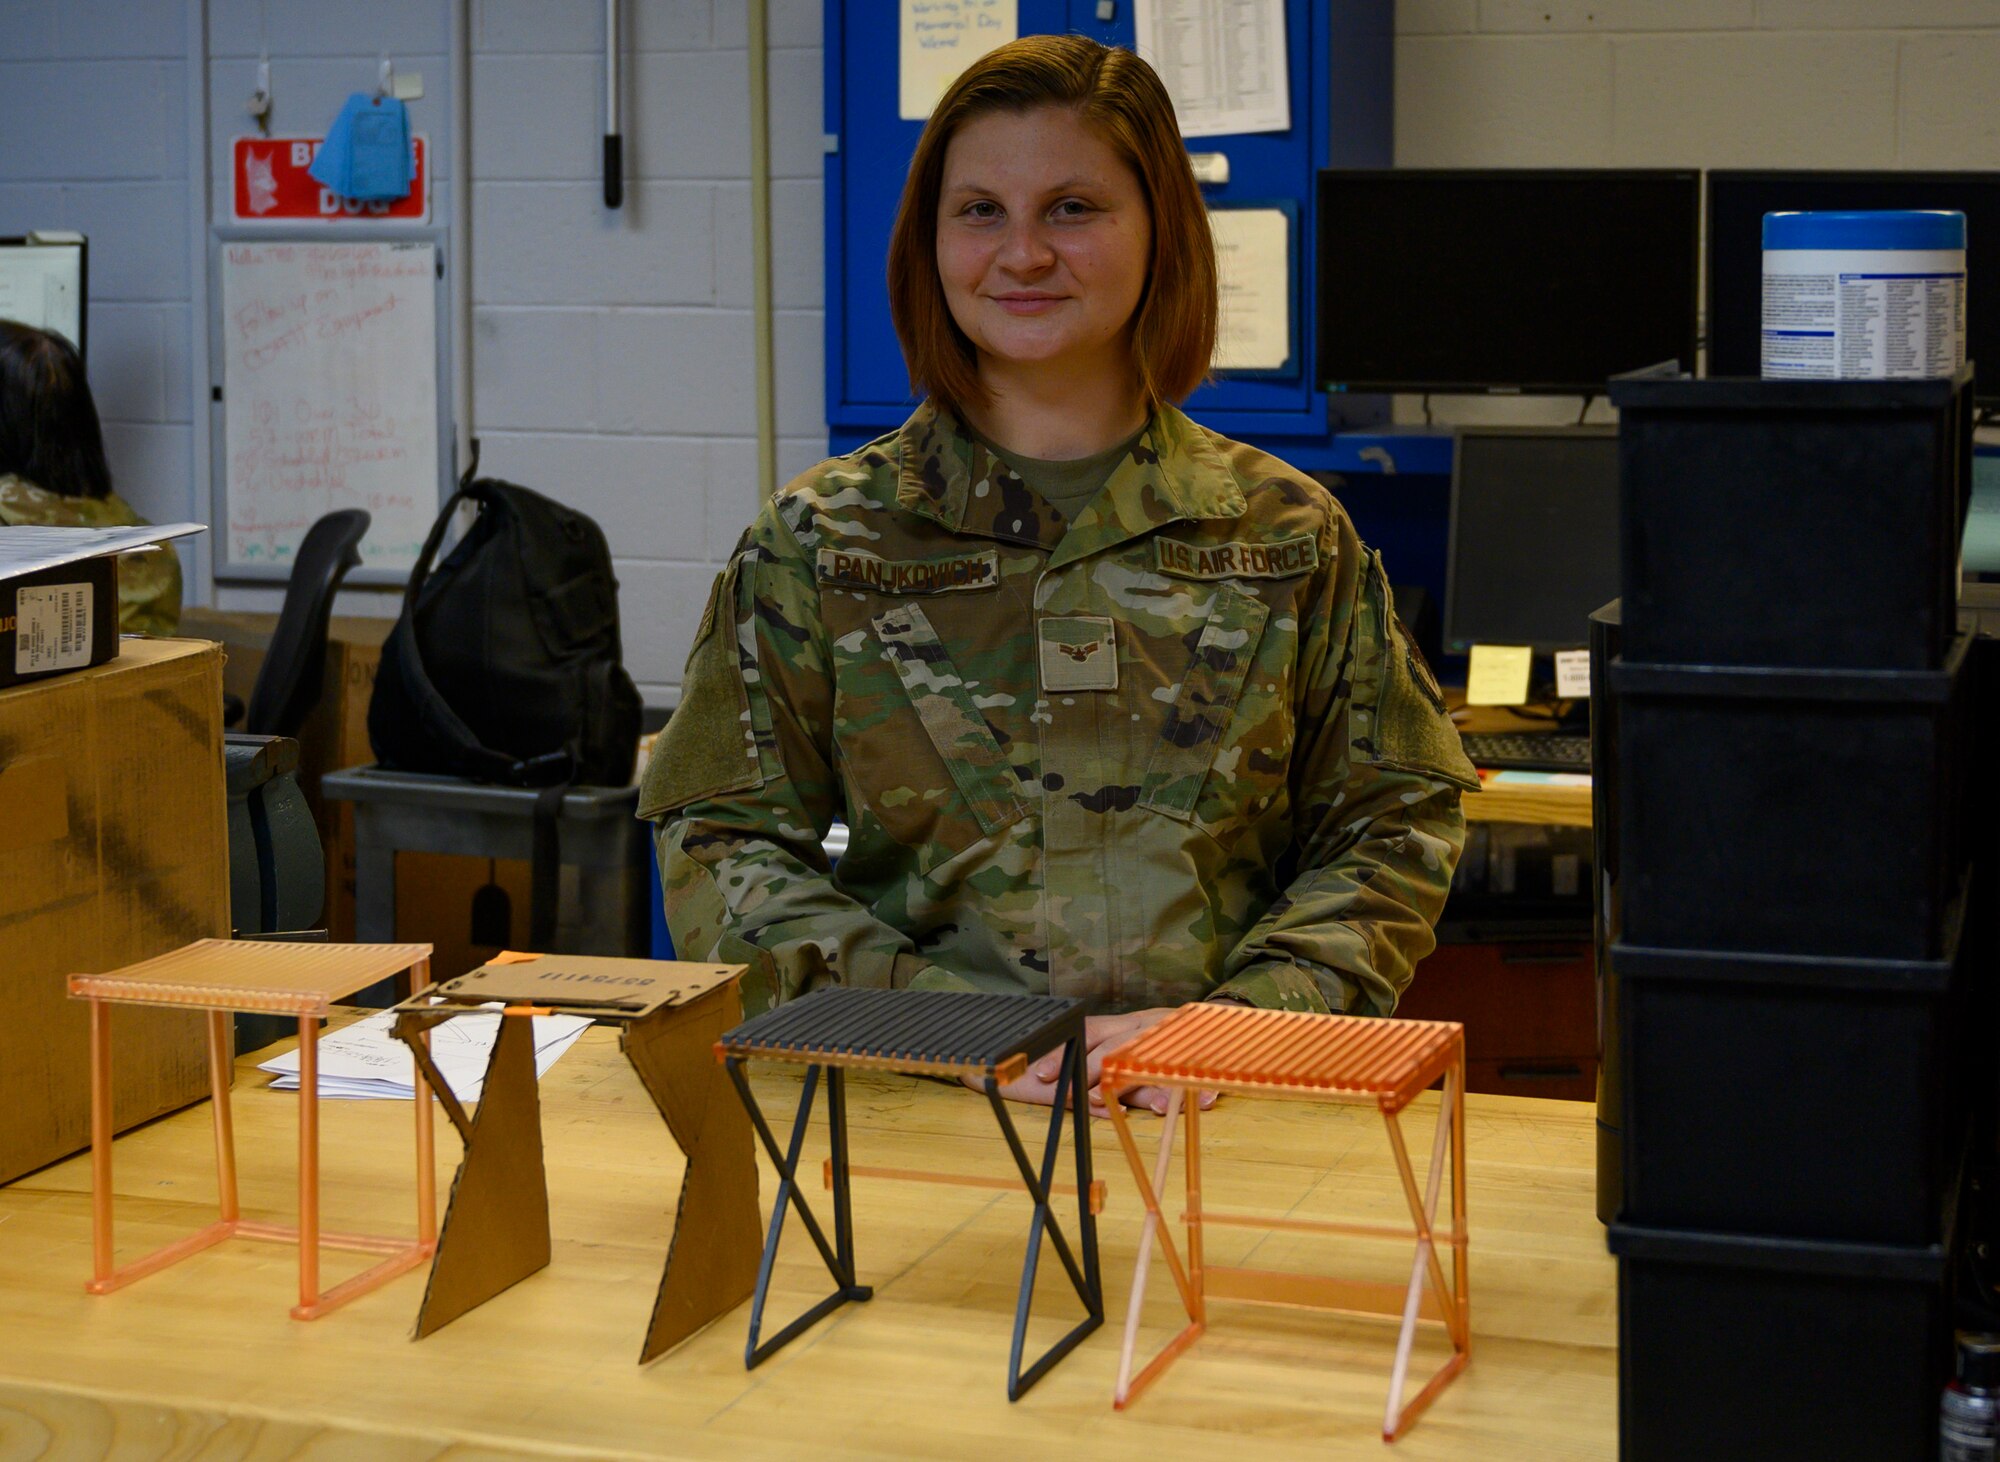 An Airman stands behind four prototypes of a curing rack the used for Nasopharyngeal swabs.